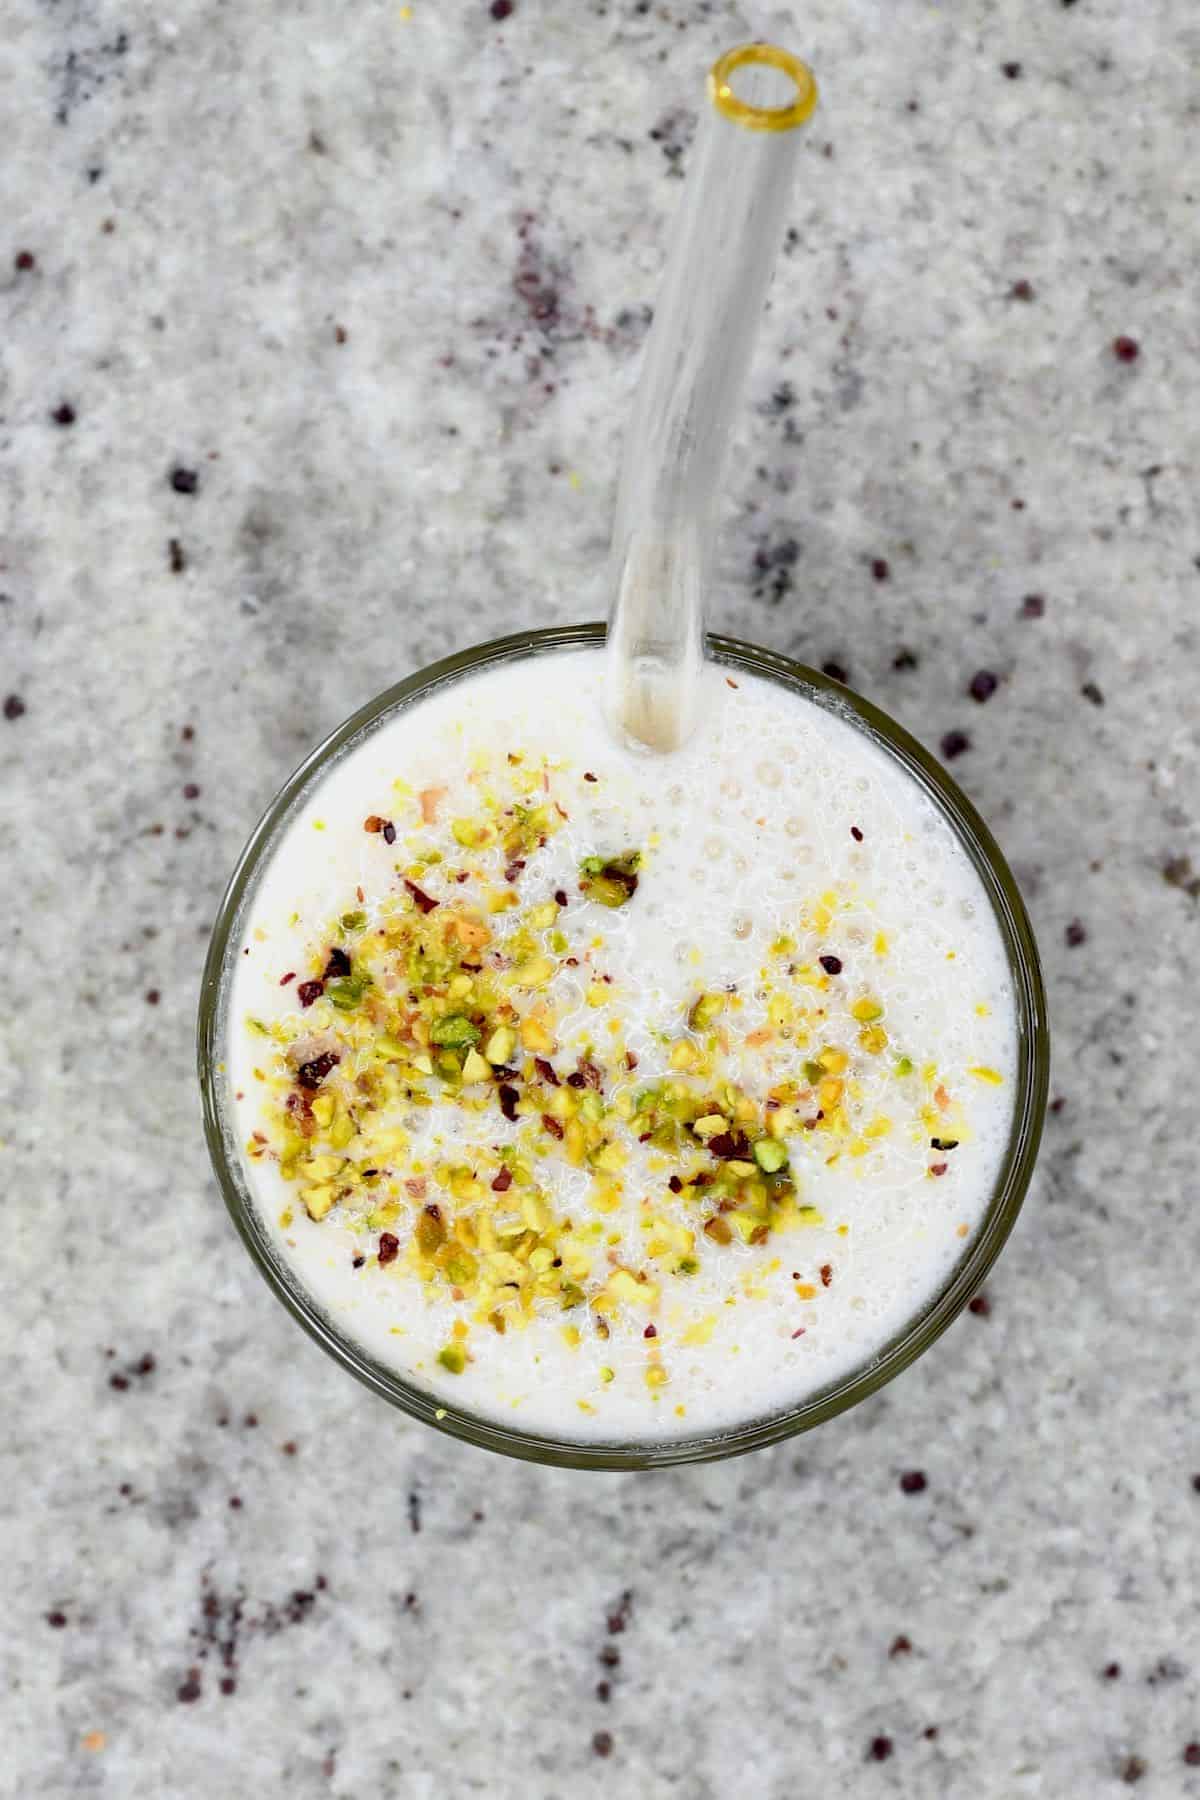 Top view of banana milkshake topped with pistachios